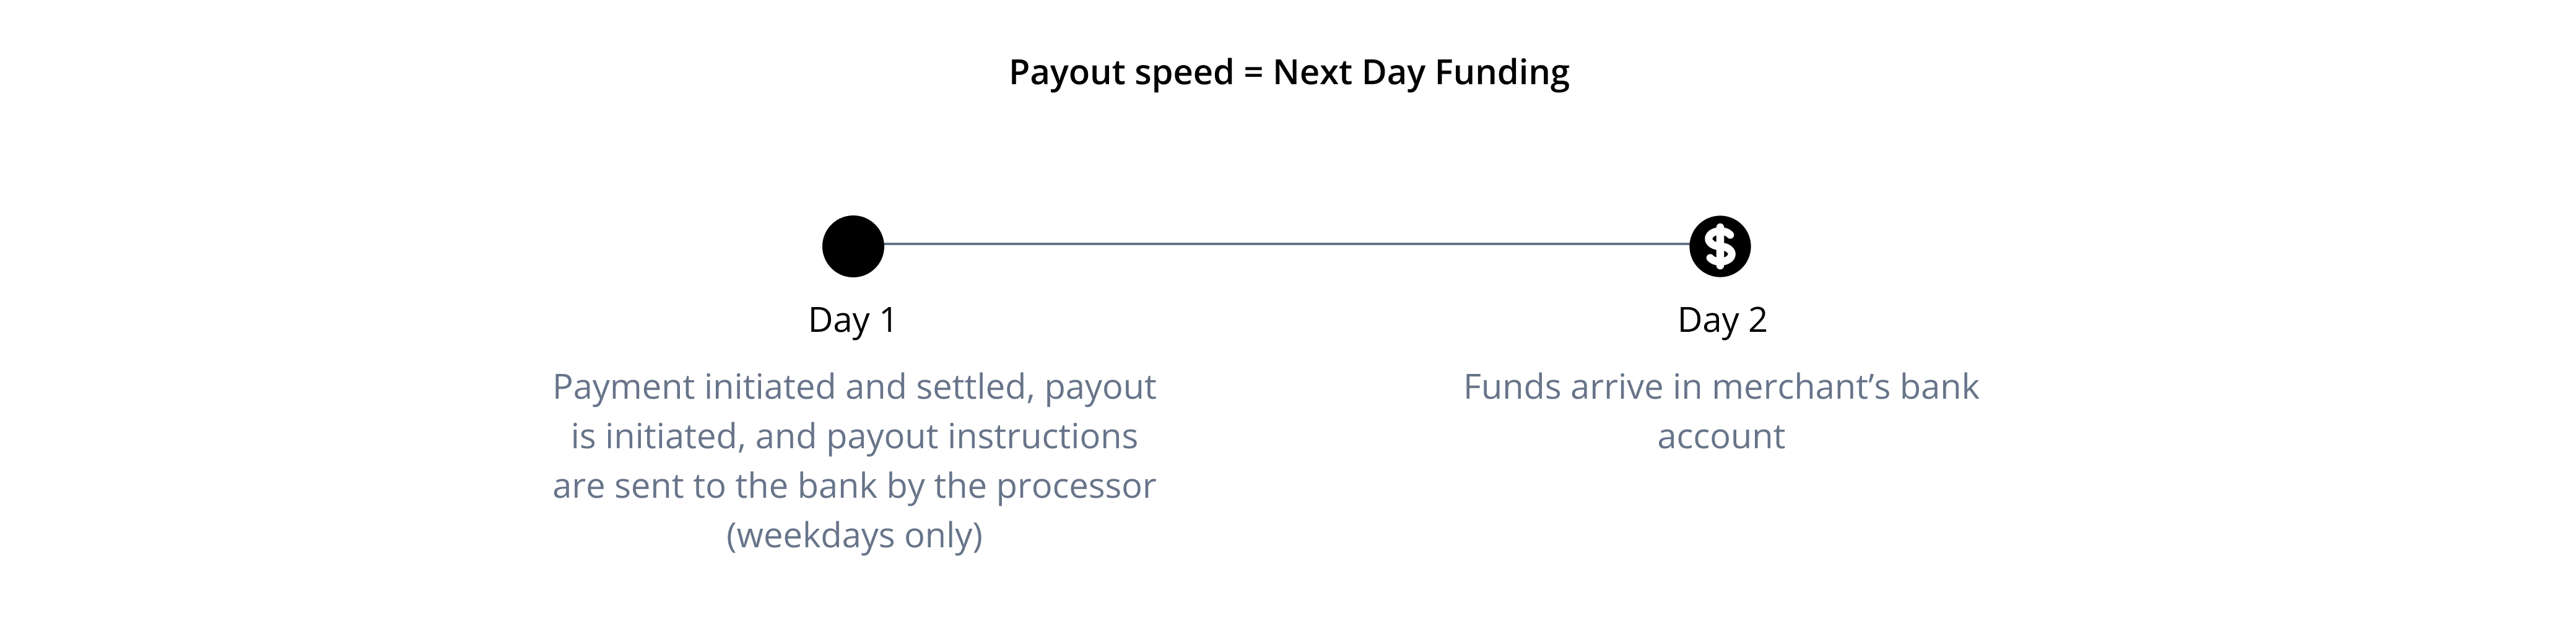 payment lifecycle _ NDF payout speed.png